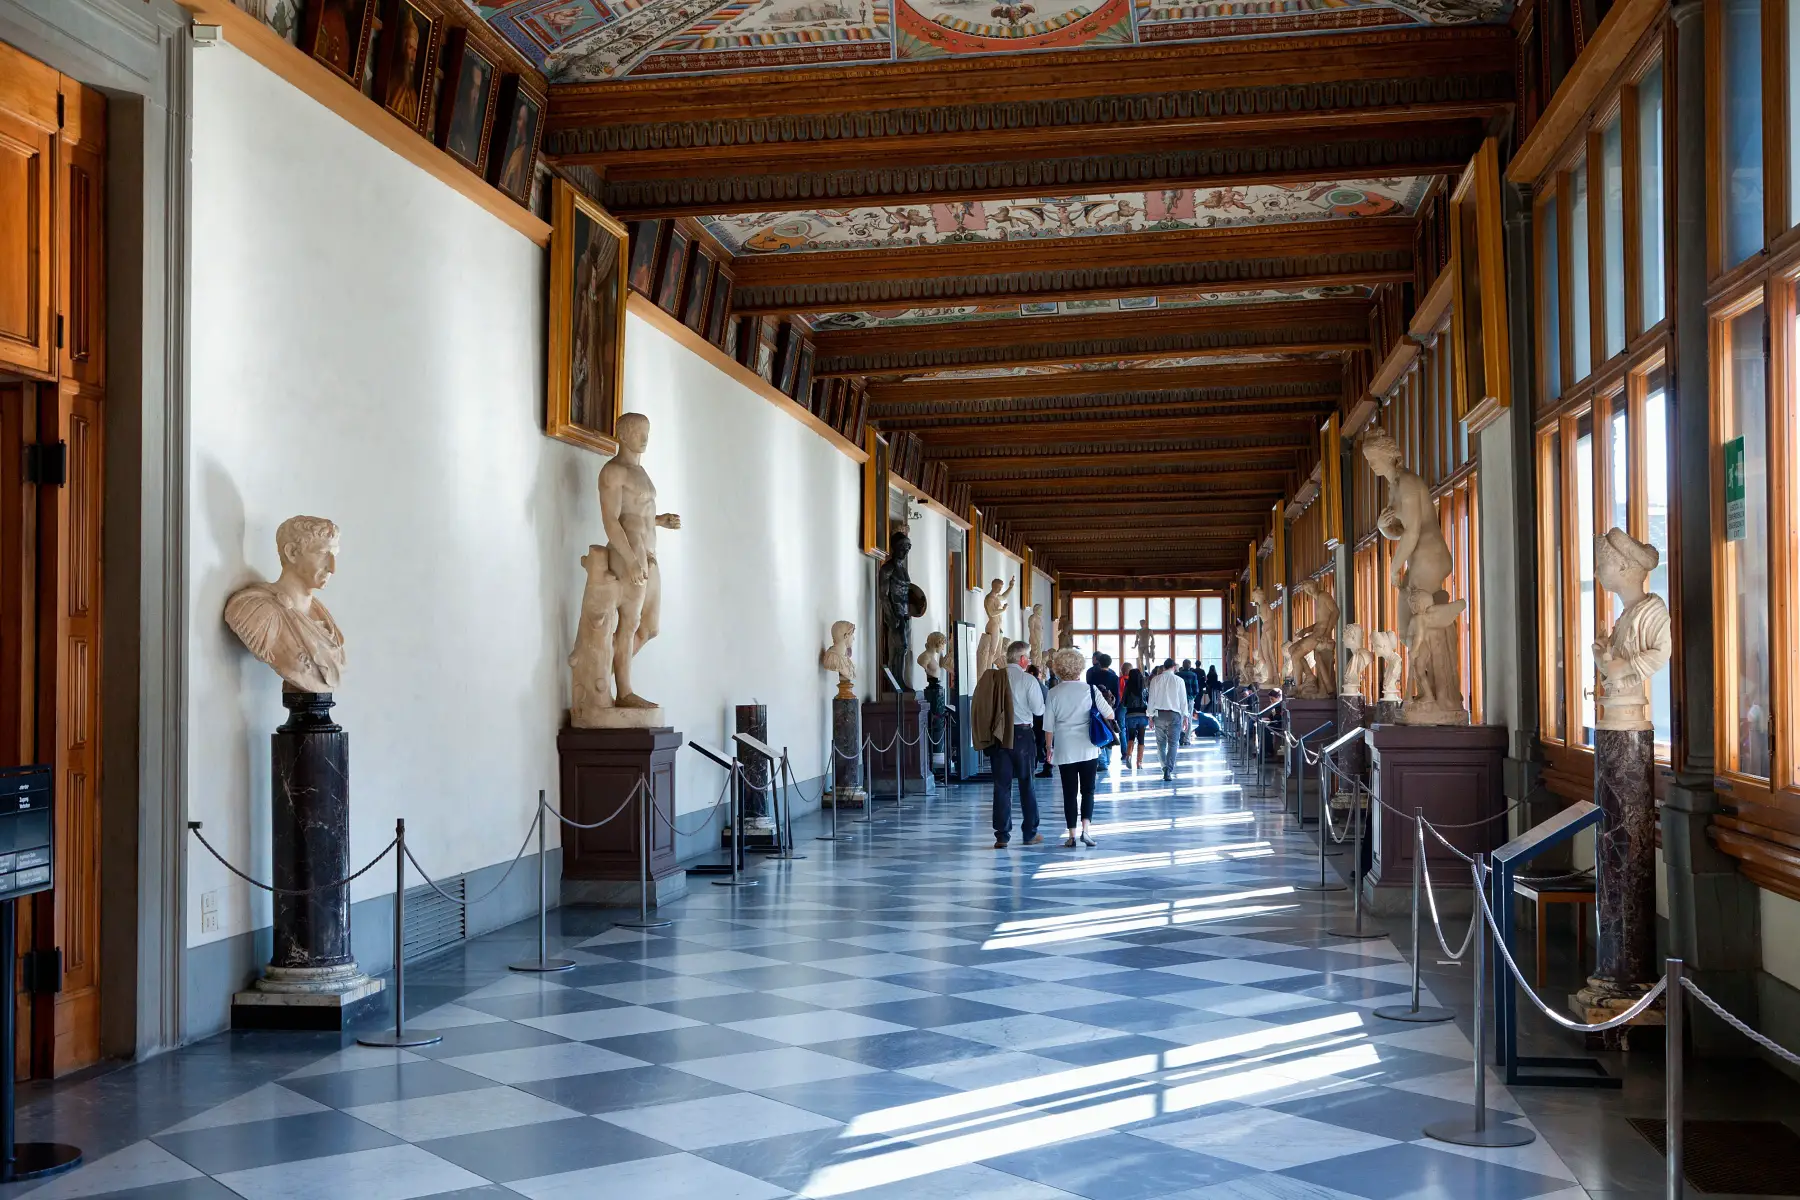 Visitors walking down the sunny halls of the Uffizi Gallery